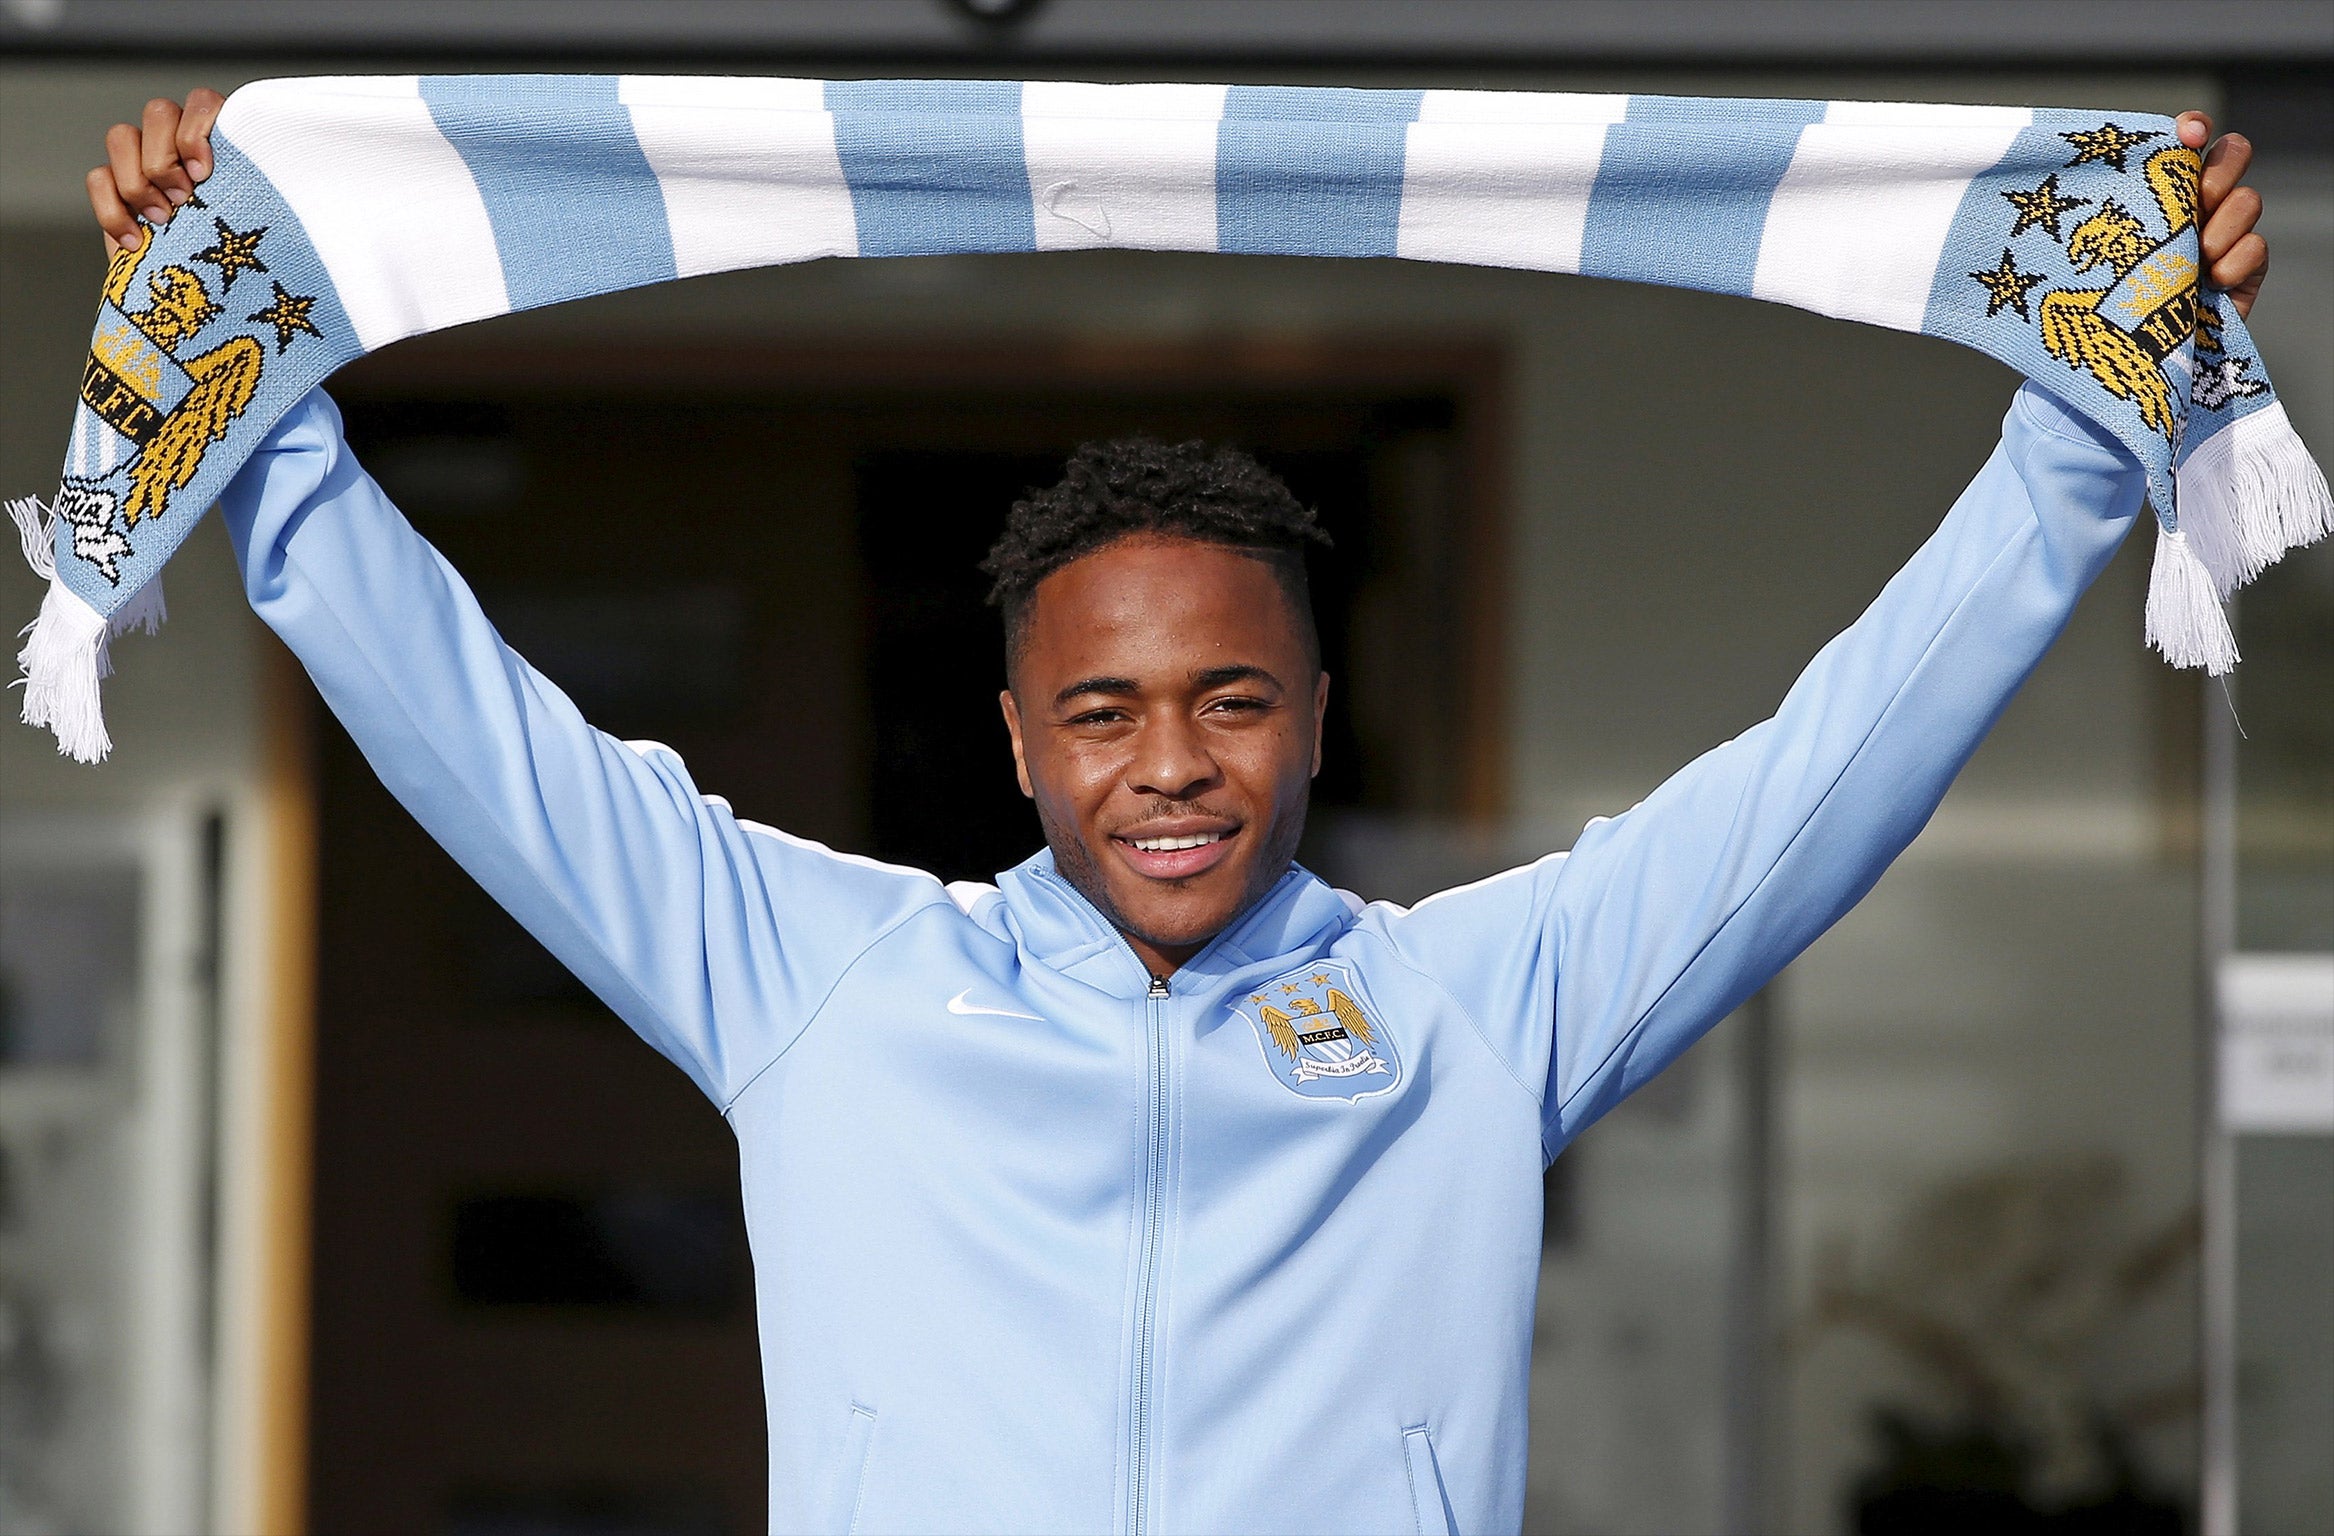 Raheem Sterling is unveiled at Manchester City